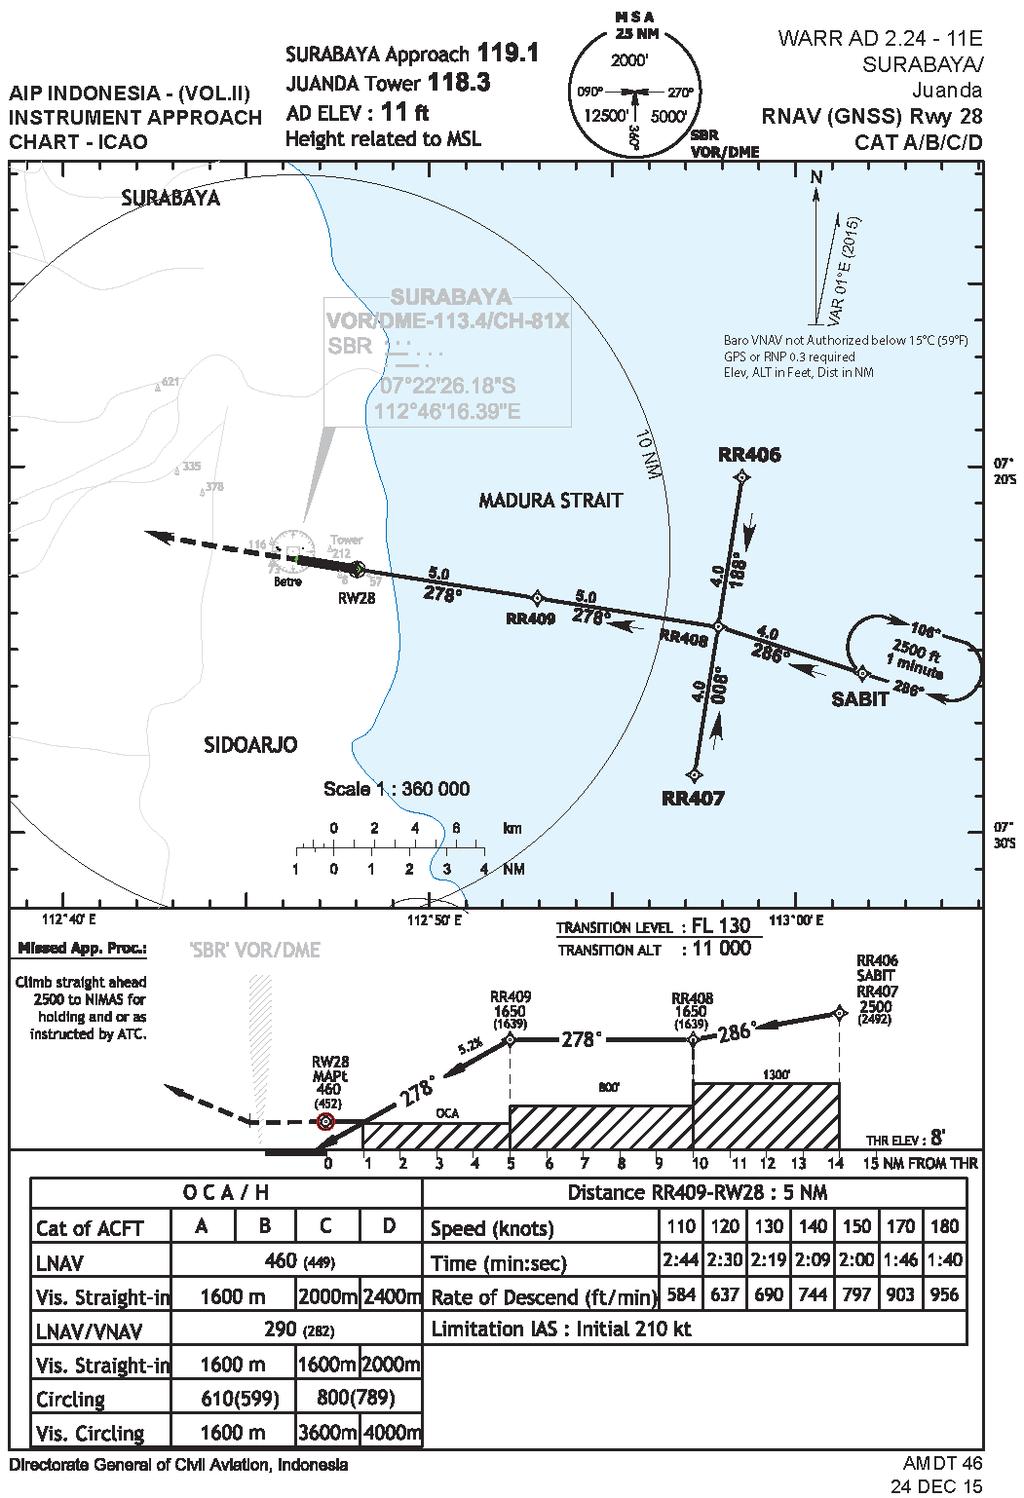 Figure 3: The RNAV approach chart as published in AIP Volume II 1.6 Aerodrome Information Juanda International Airport (WARR) located at Surabaya, East Java operated by PT. Angkasa Pura I (Persero).